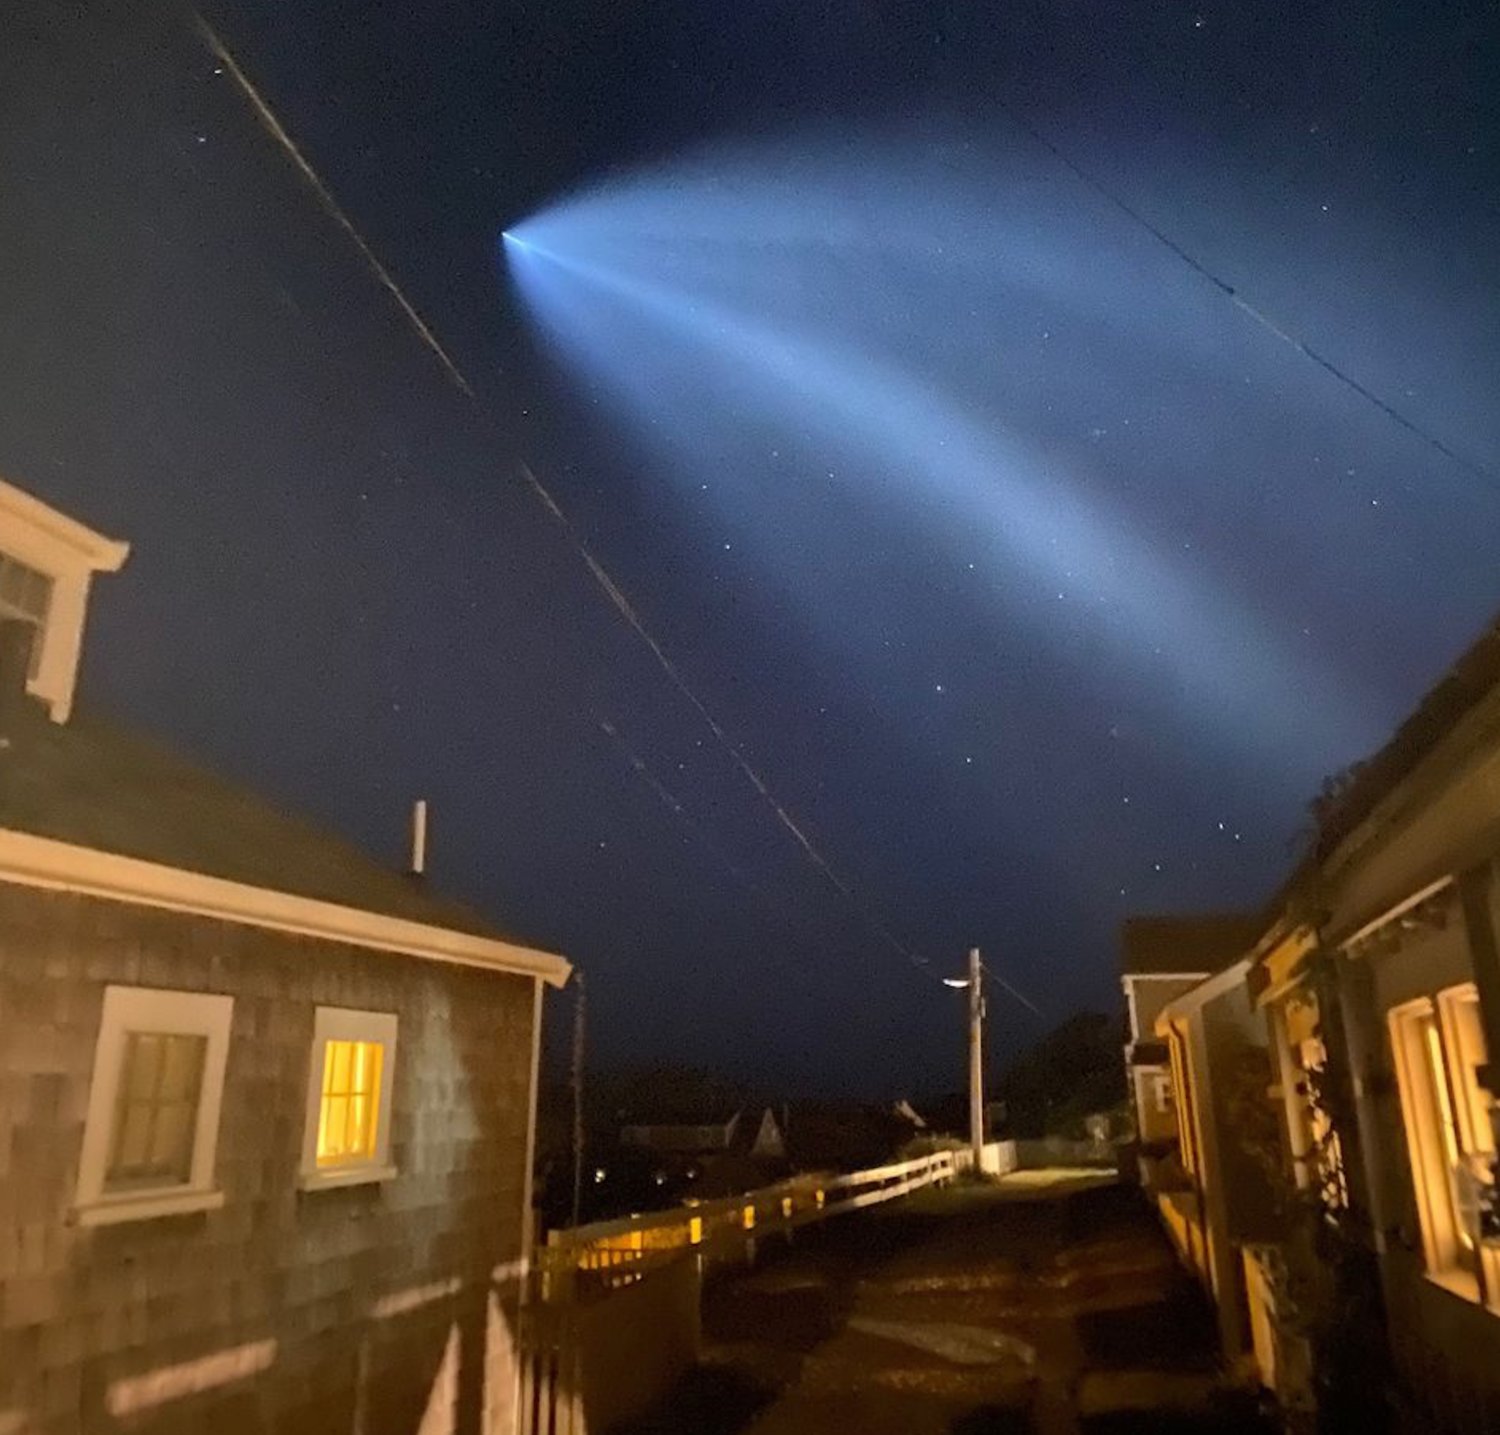 This white light seen streaking across the Nantucket sky Saturday night was a SpaceX Falcon 9 rocket.